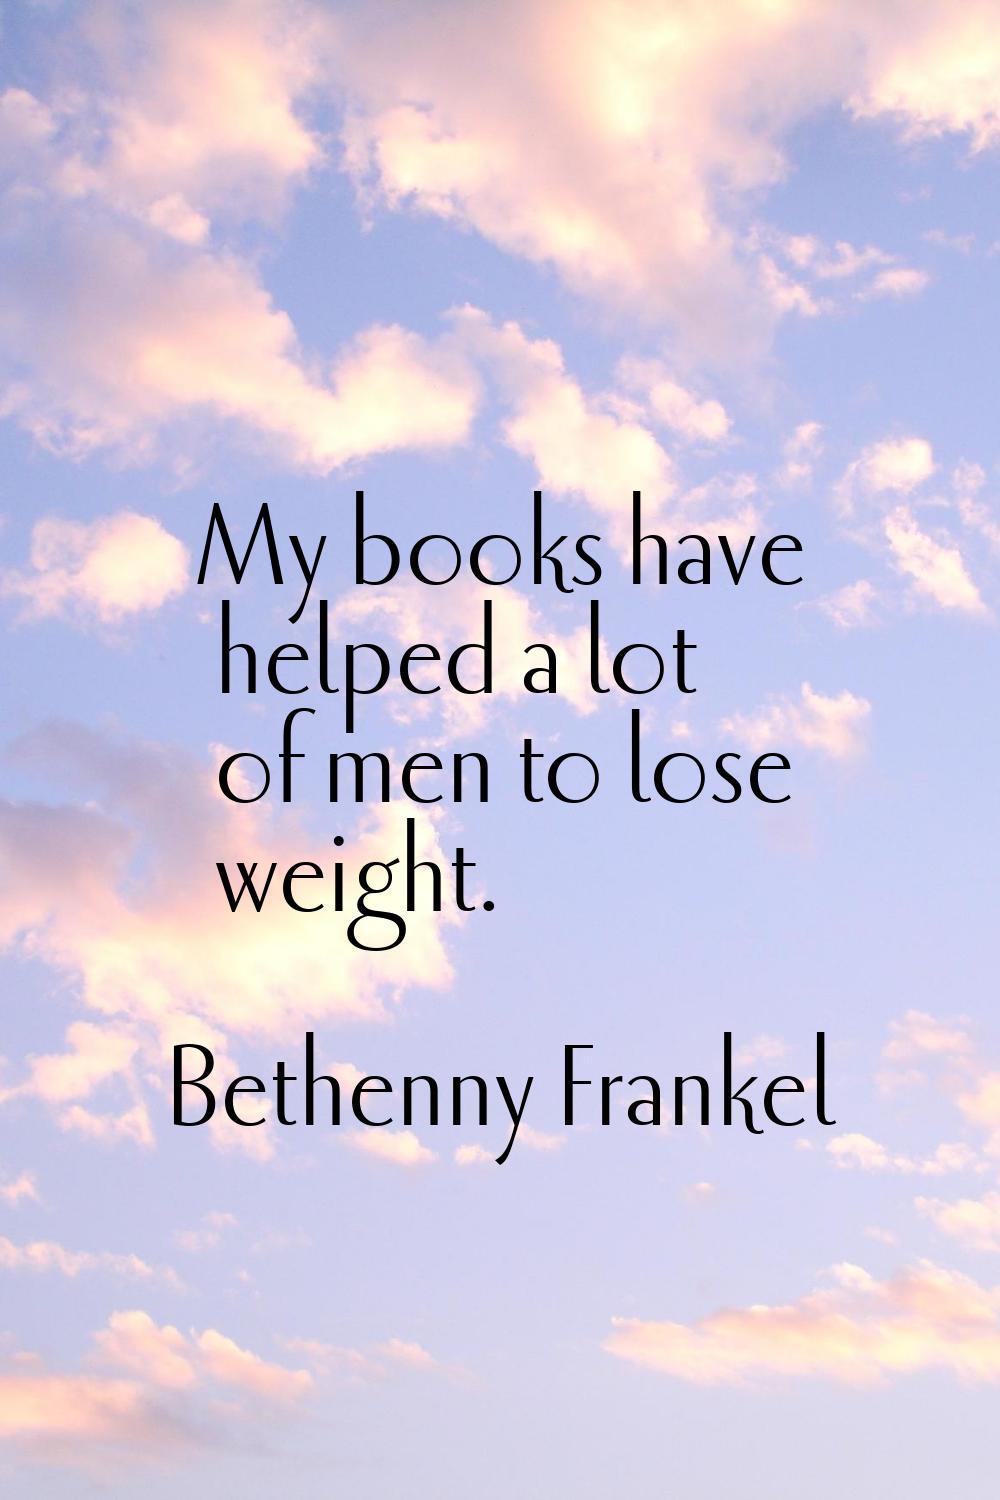 My books have helped a lot of men to lose weight.